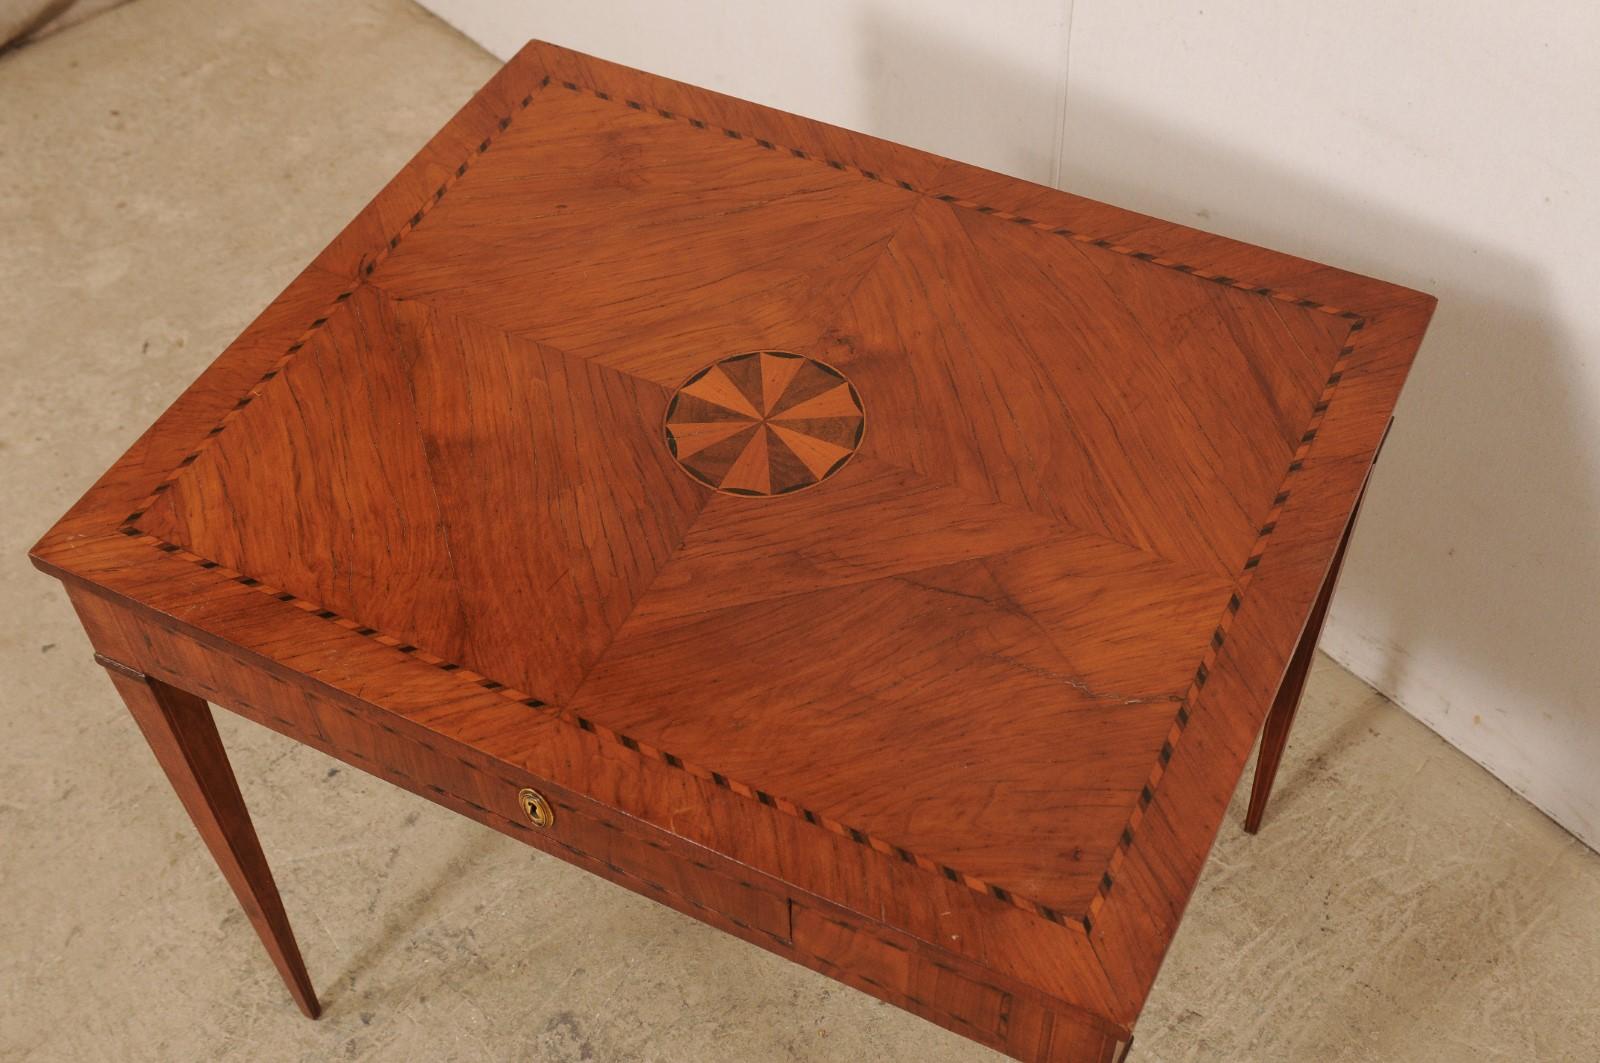 Italian Occasional Table with Floral Medallion Inlay Adorning Top, Early 19th C For Sale 1